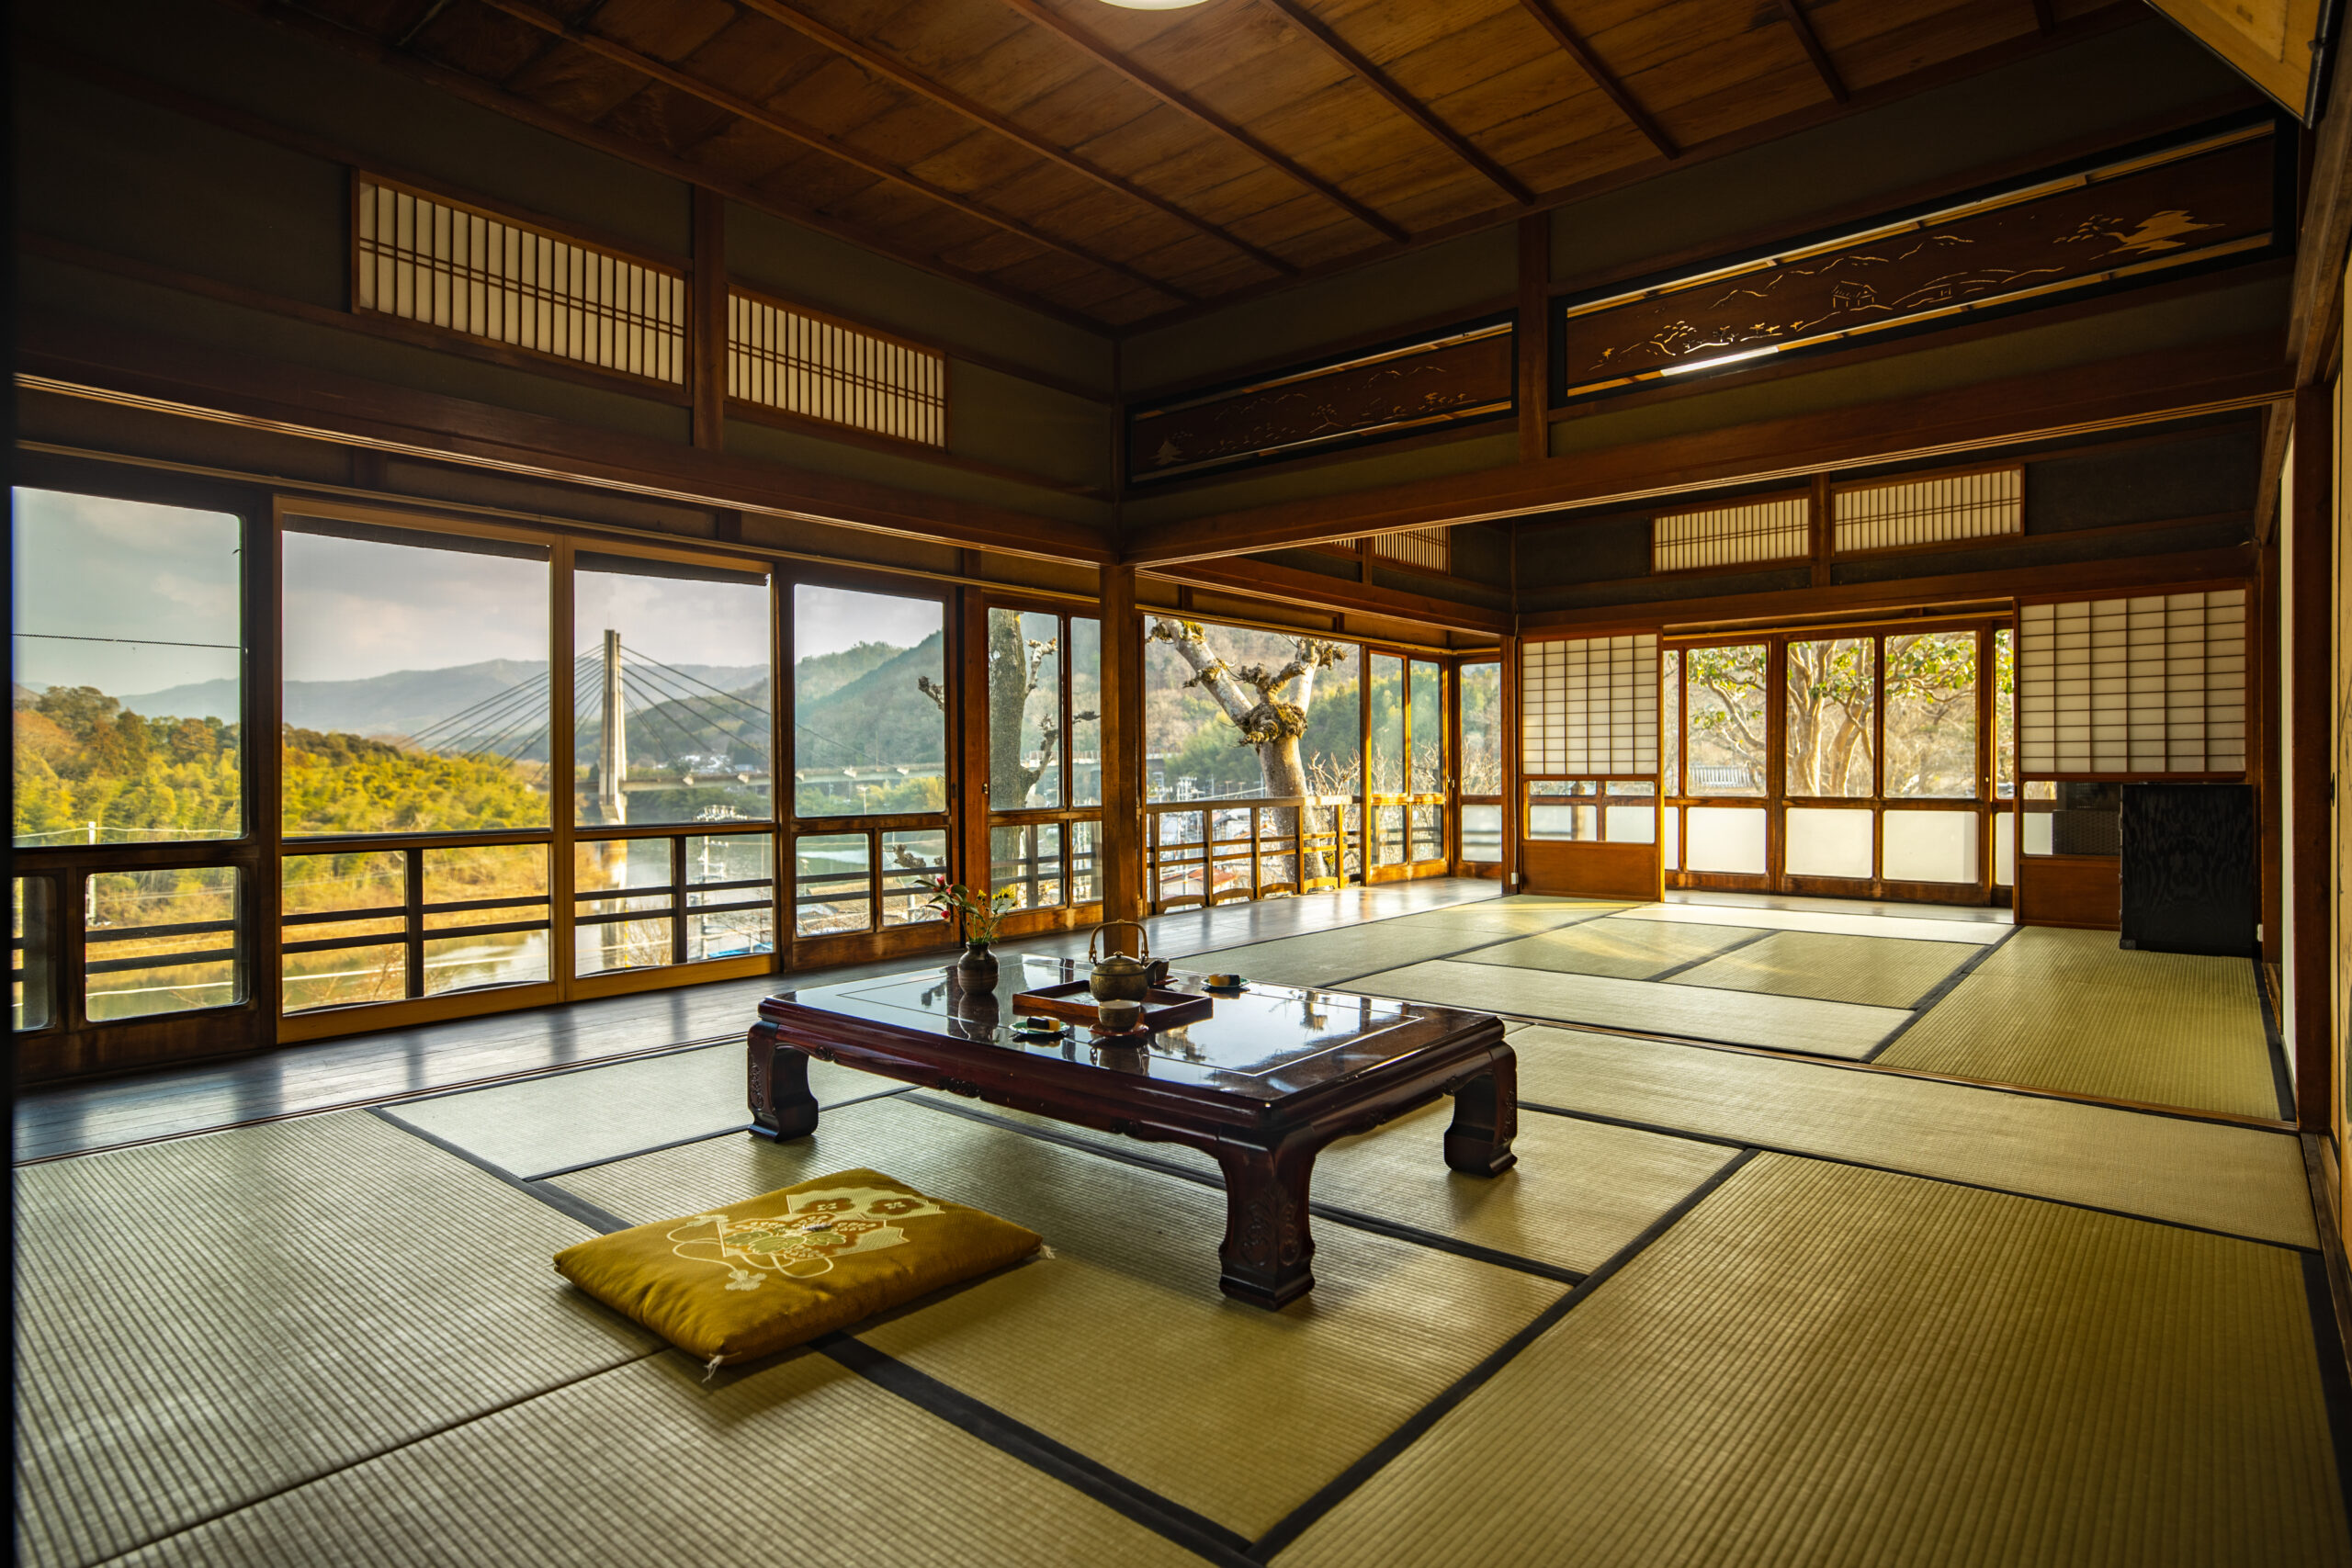 Take on a hands-on, mini tatami mat-making experience, Experience Spots